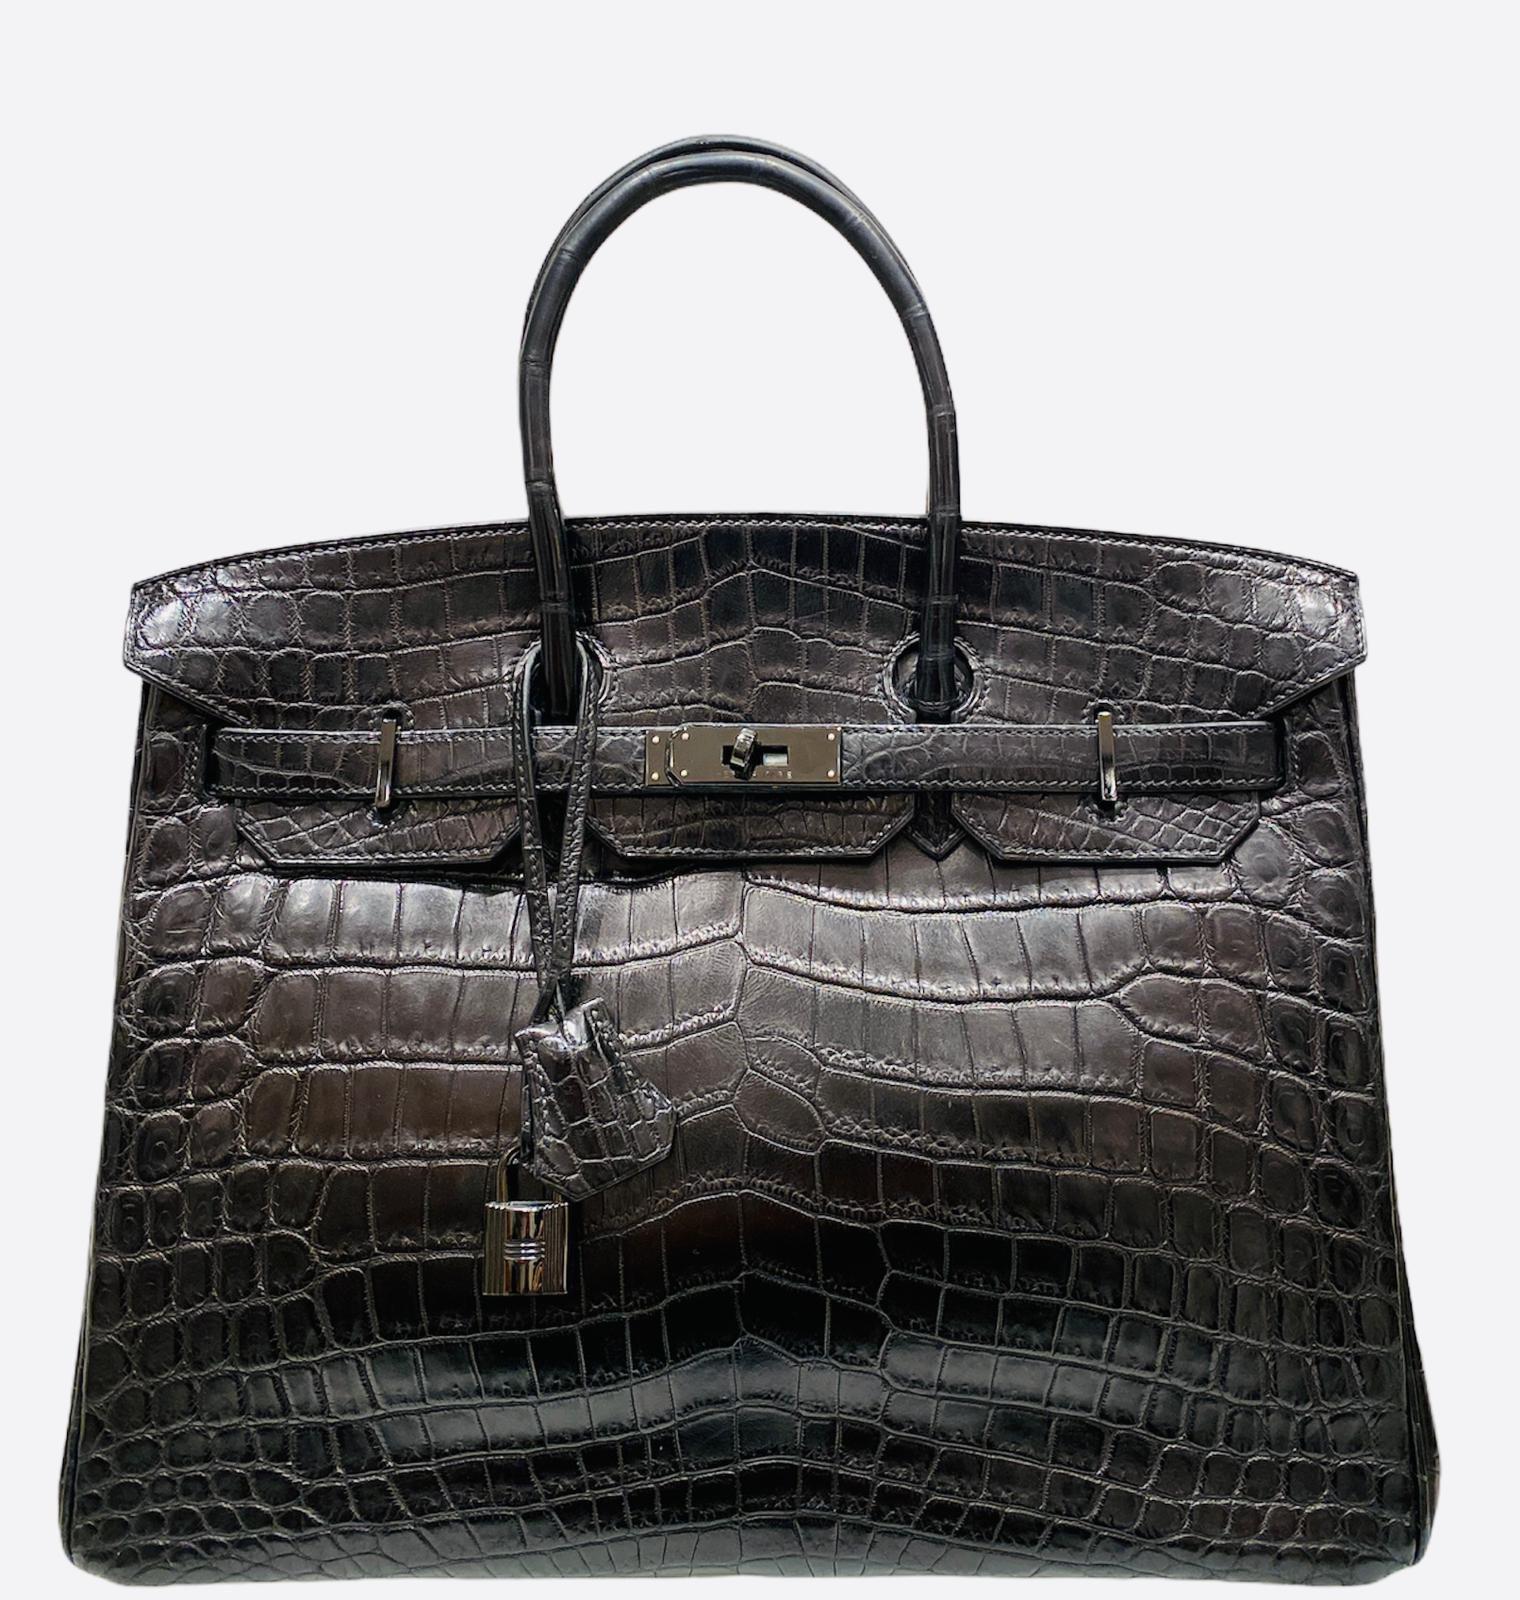 Sac Birkin 35 Matte So Black Nilo Crocodile, year 2010 stamp N Square 
Dust-bag Clochette and key included .It is carried by hand,
A beautiful piece rare and hard to find.
Dimensions 35 x 25 x 15 cm 